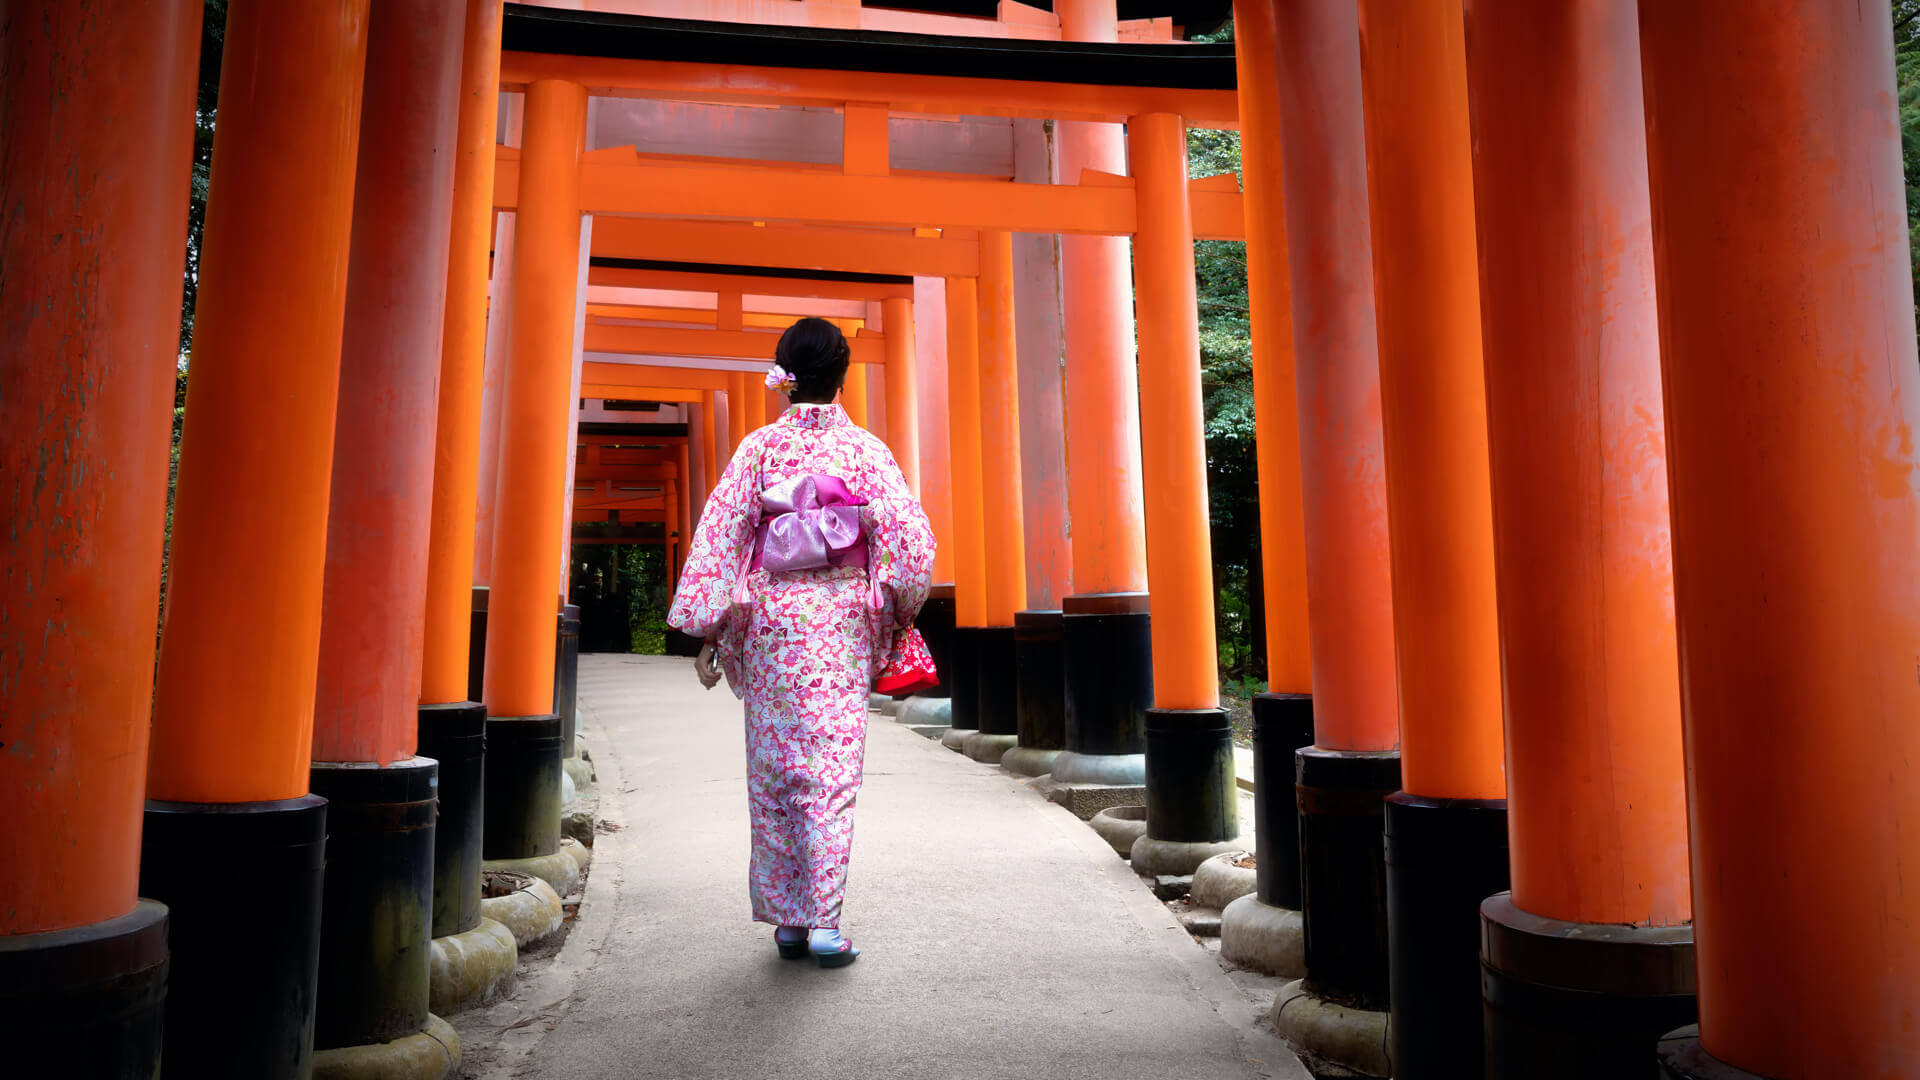 Private Japan Tours: Multi-Day, Small Group | JAPAN and more